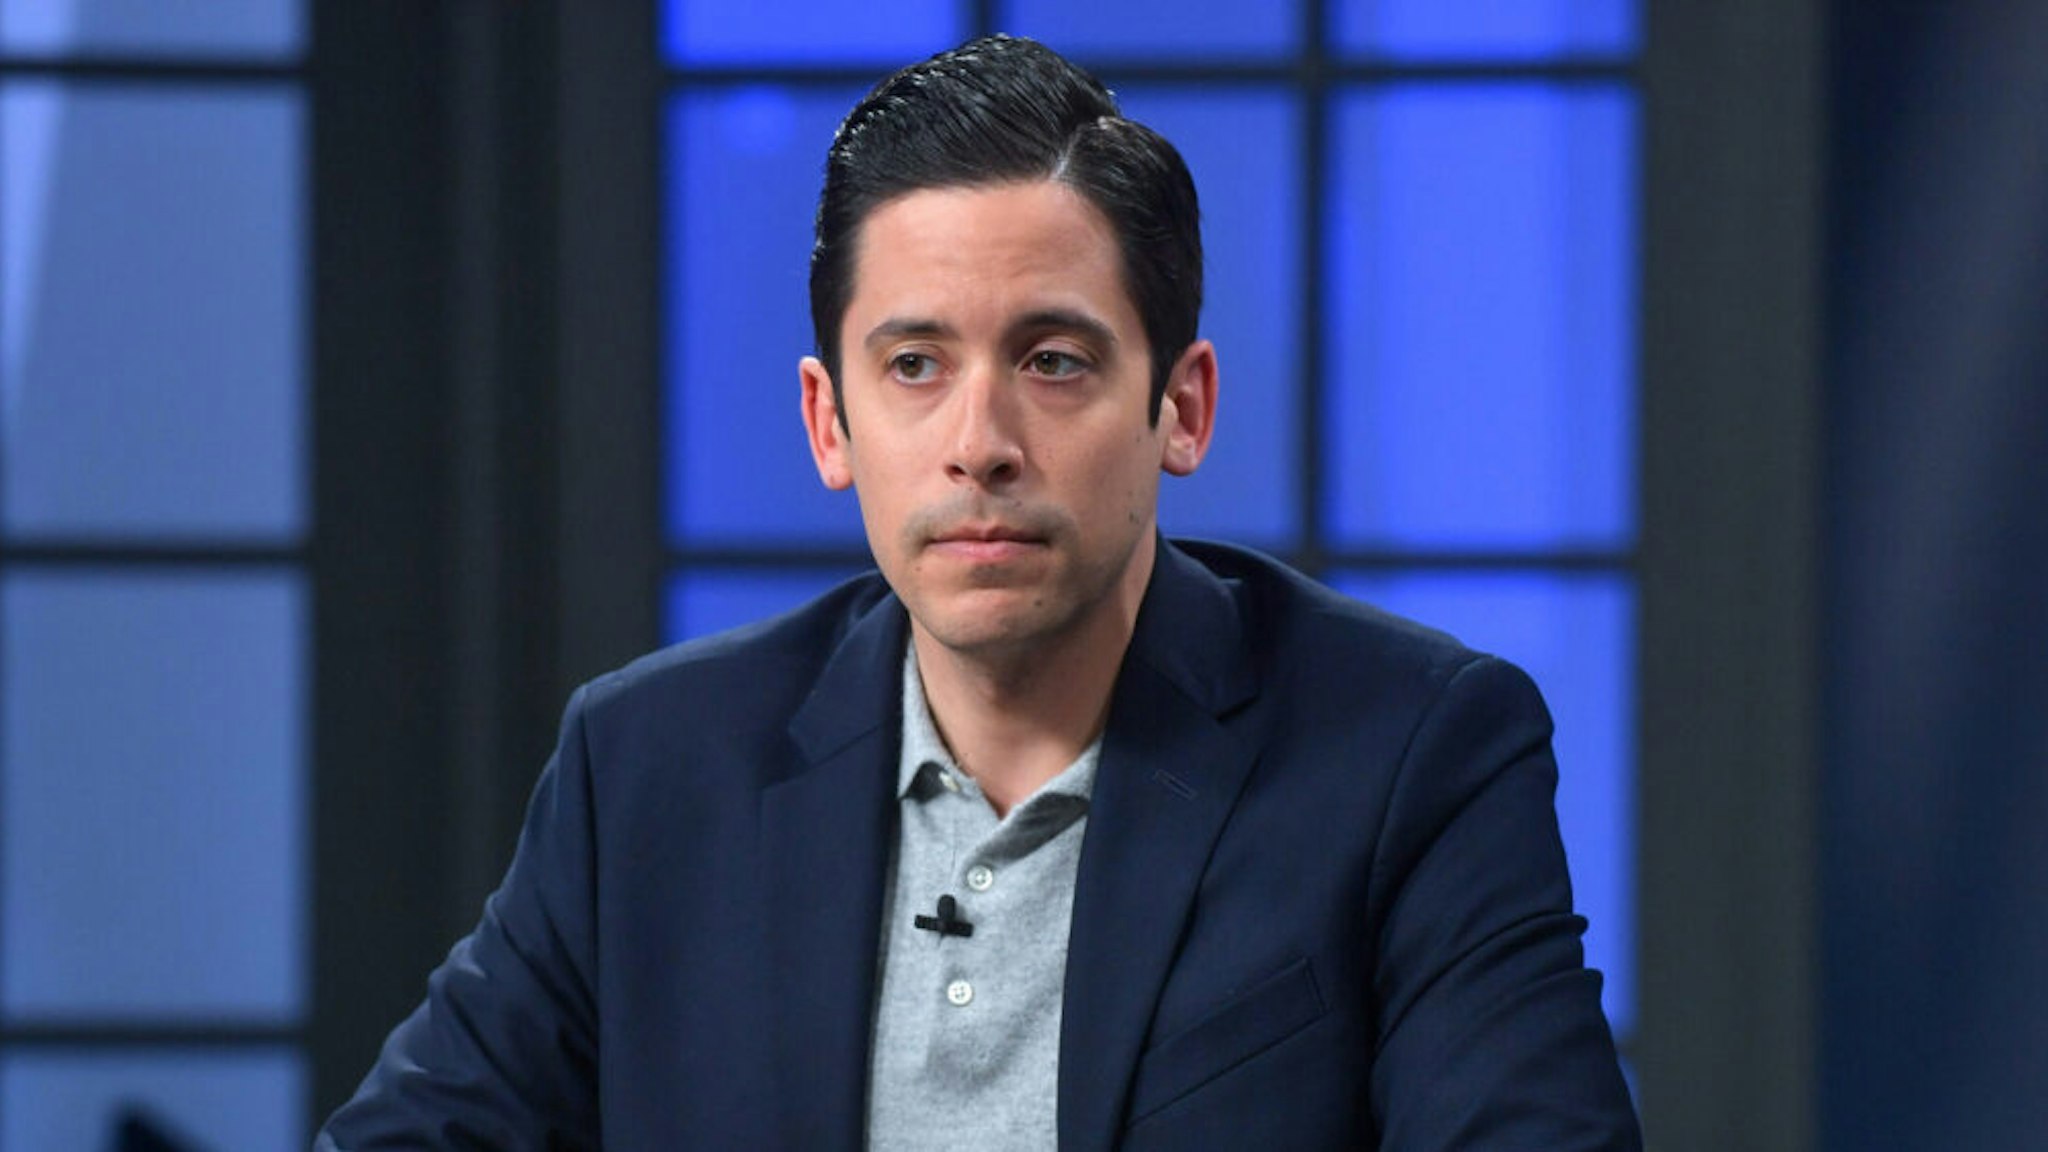 Michael Knowles is seen on set of "Candace" on April 19, 2022 in Nashville, Tennessee